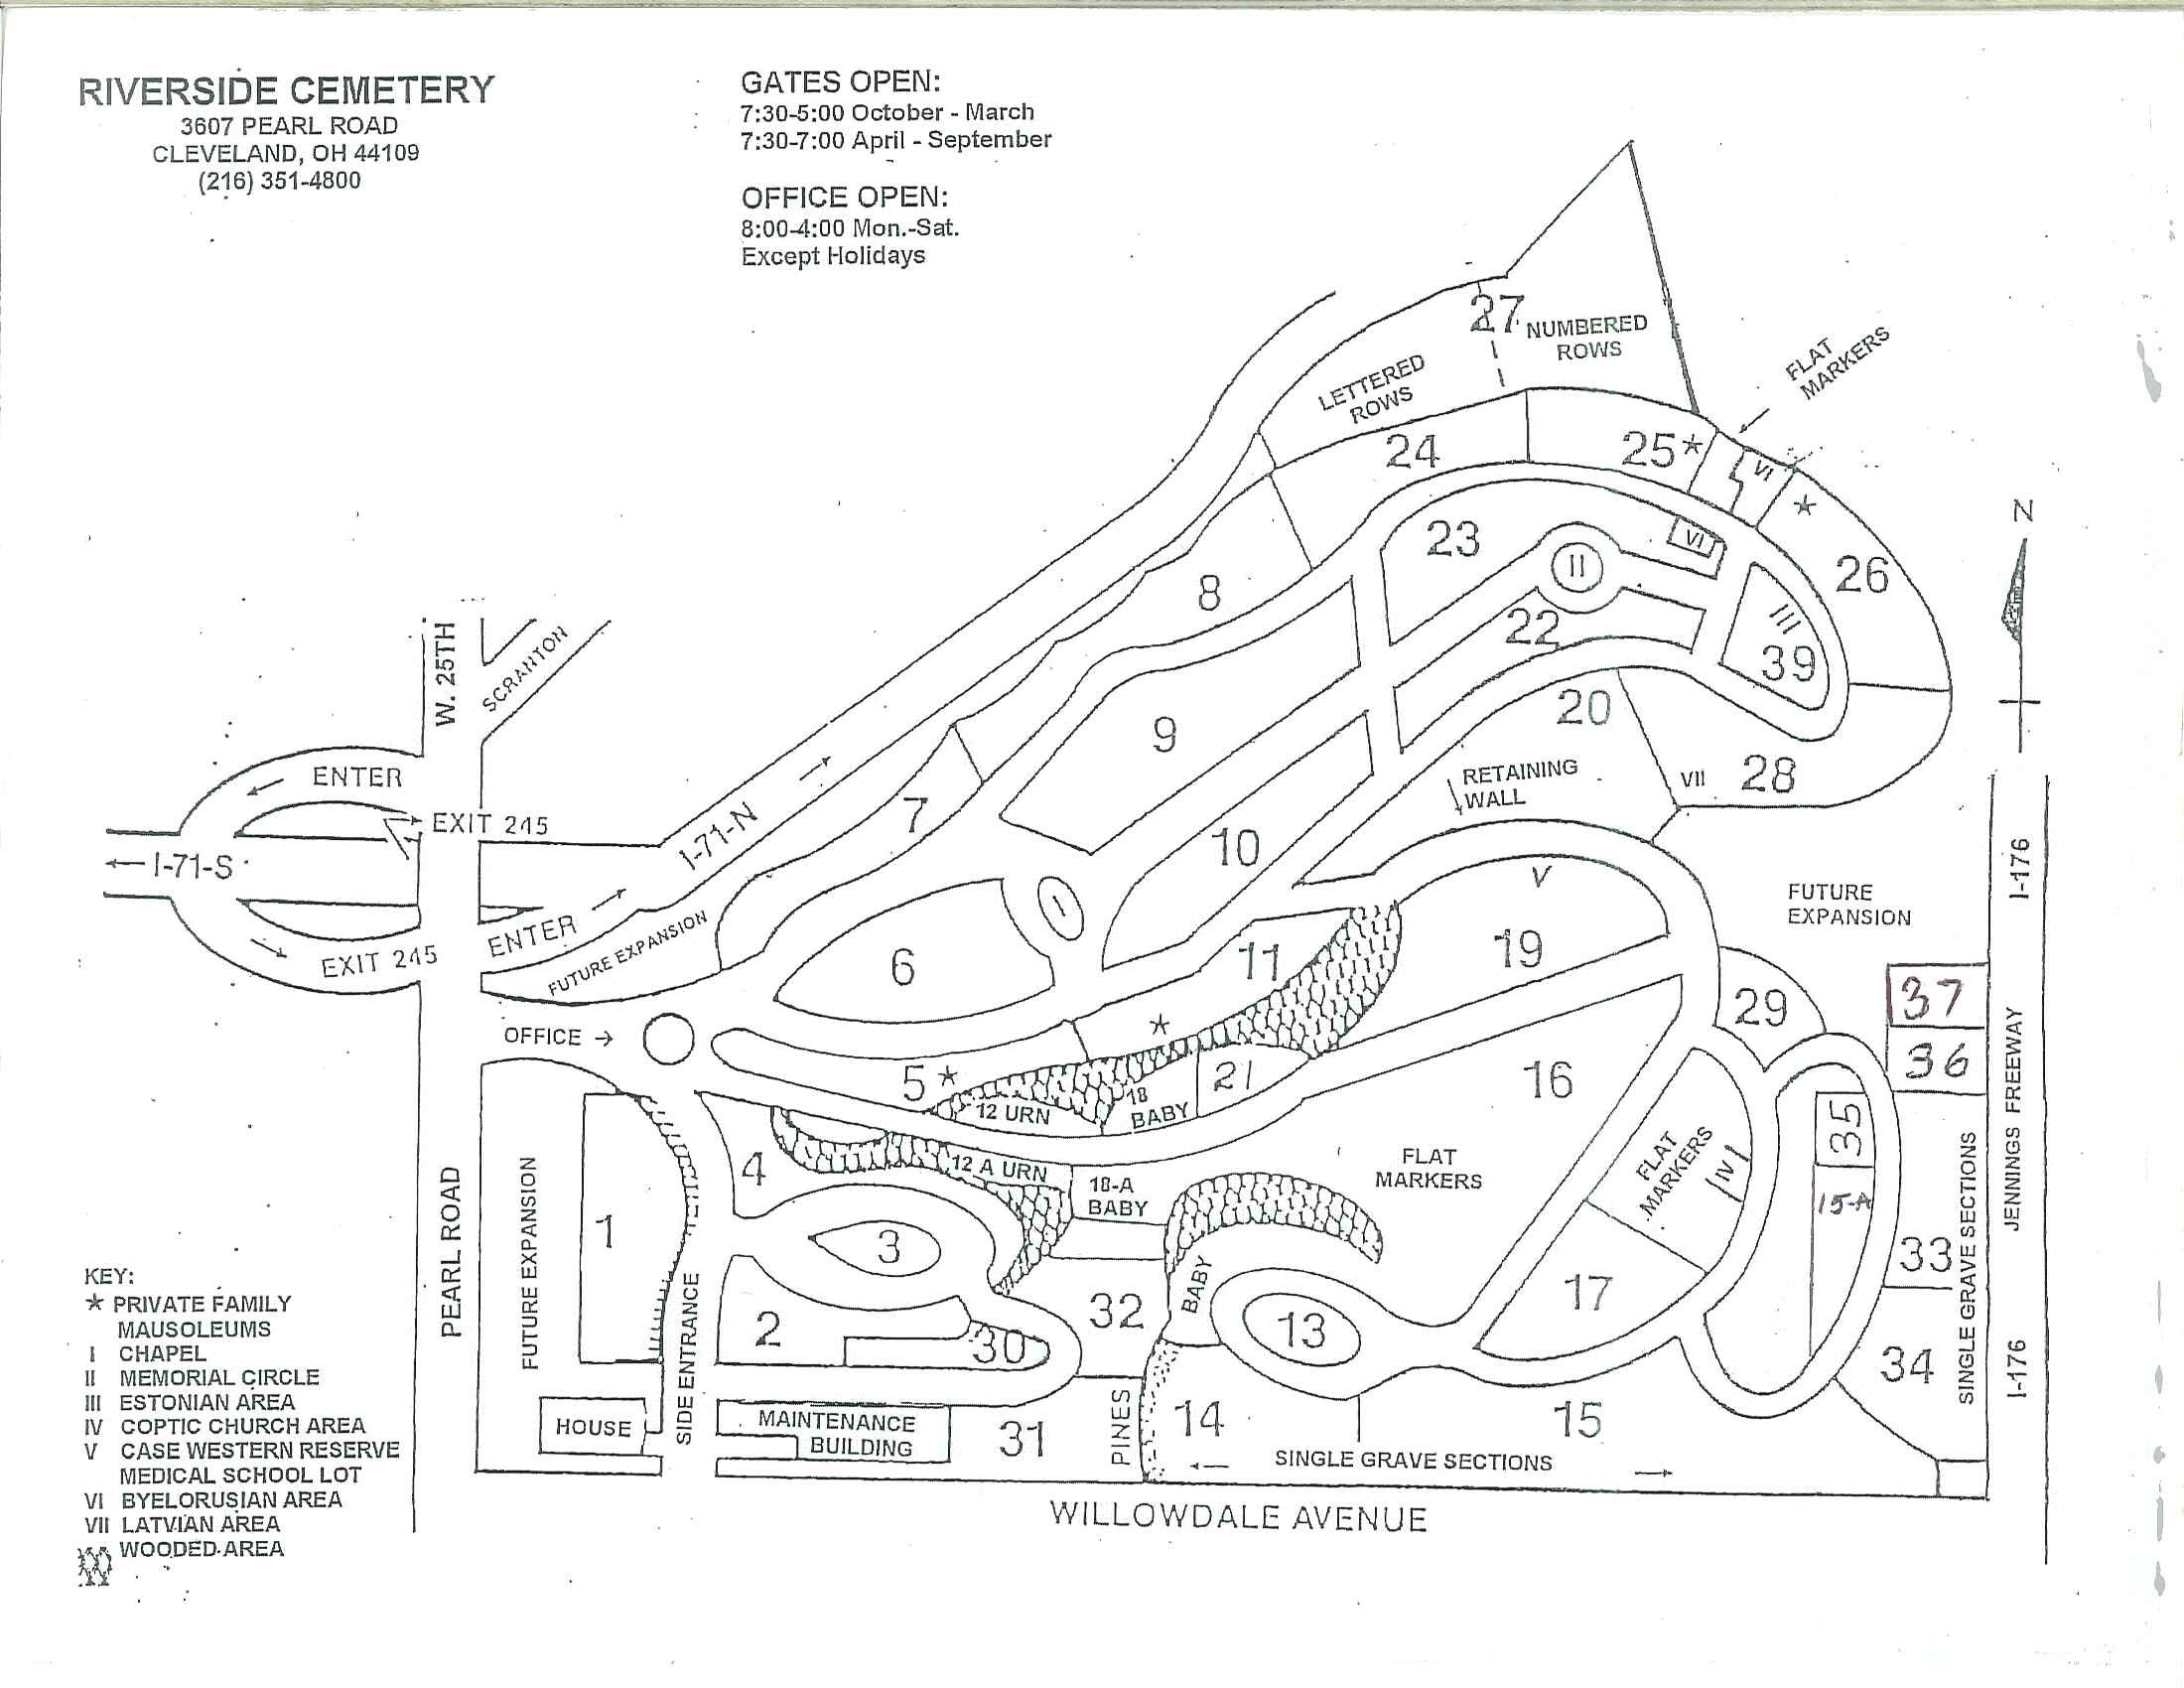 Map of Riverside Cemetery in Cleveland, Ohio